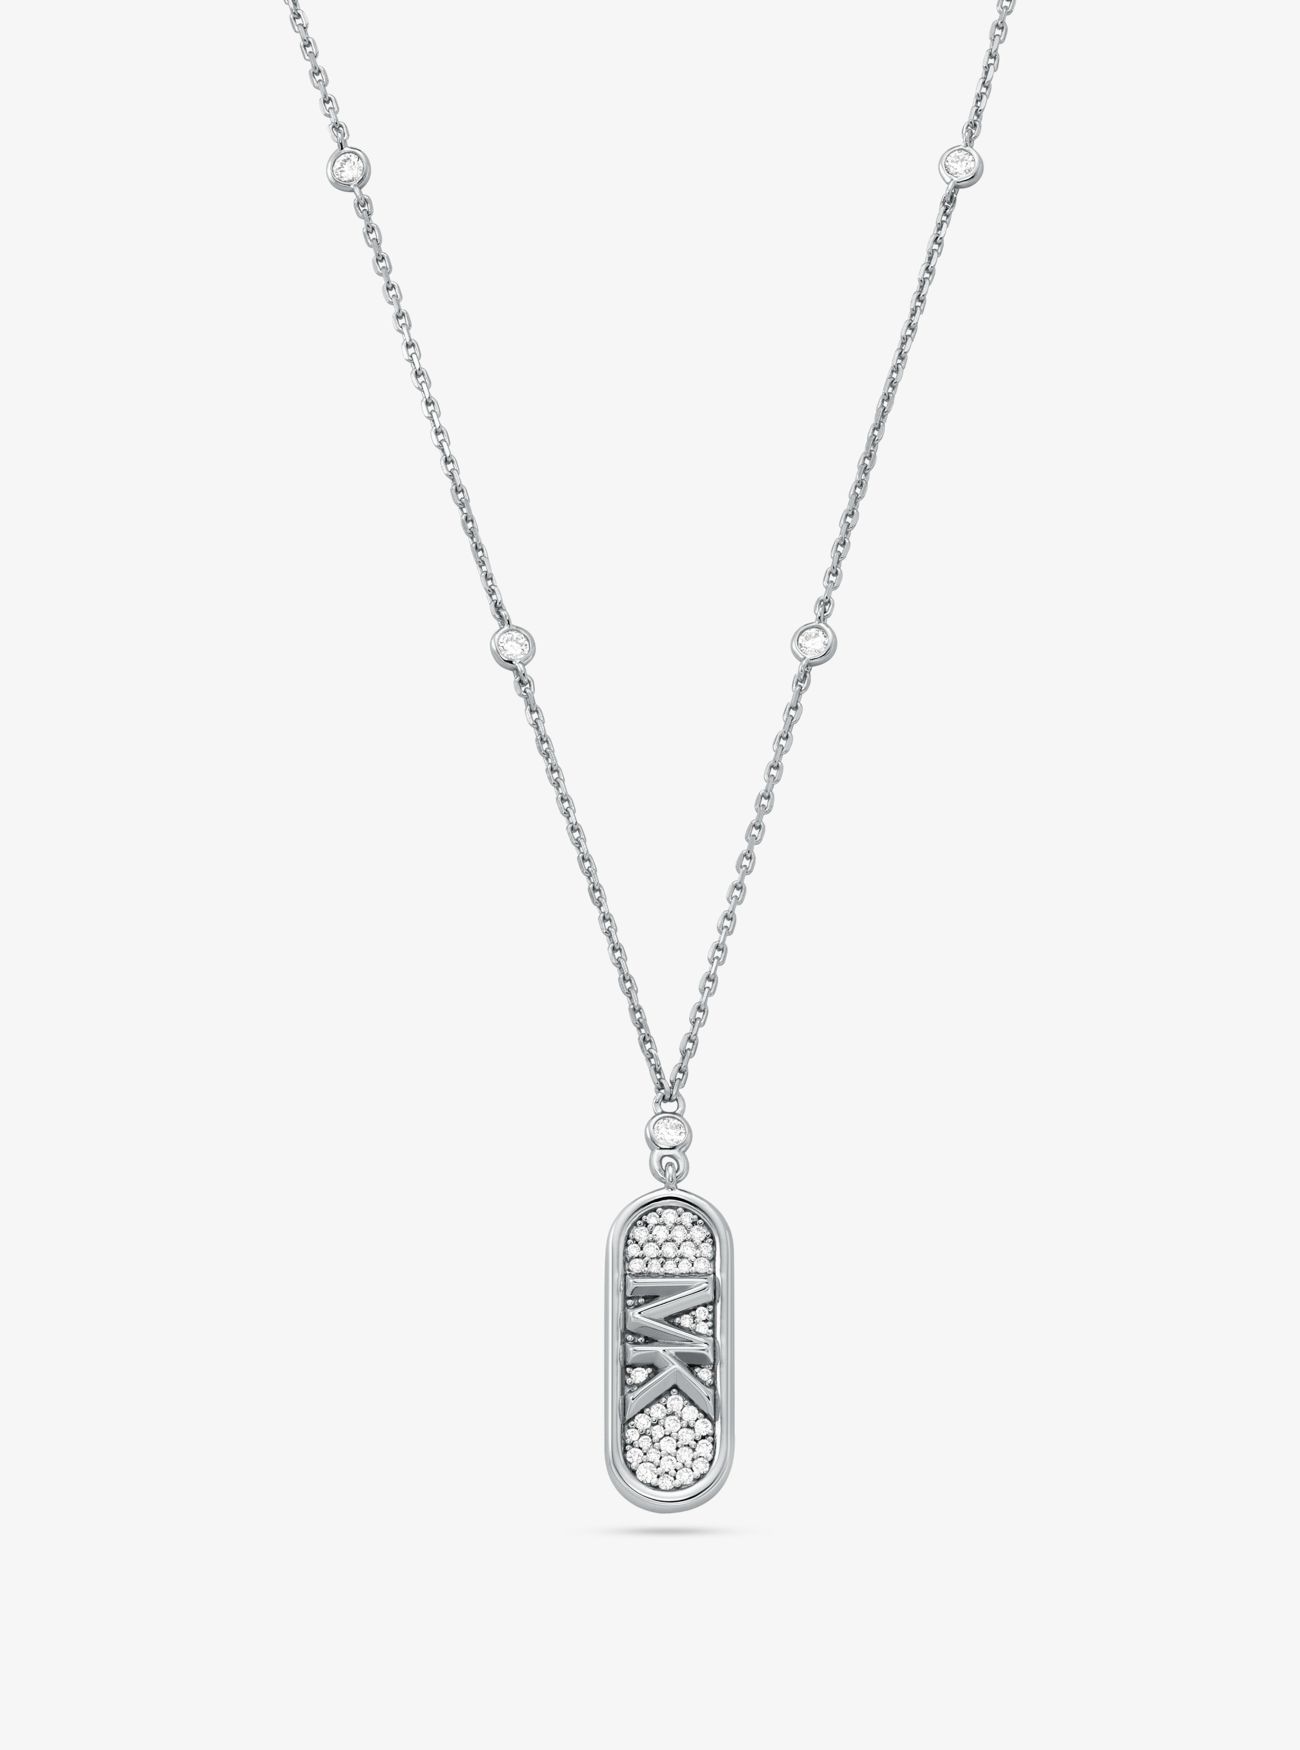 MK PavÃ© Precious Metal-Plated and Sterling Silver Empire Logo Necklace - Silver - Michael Kors